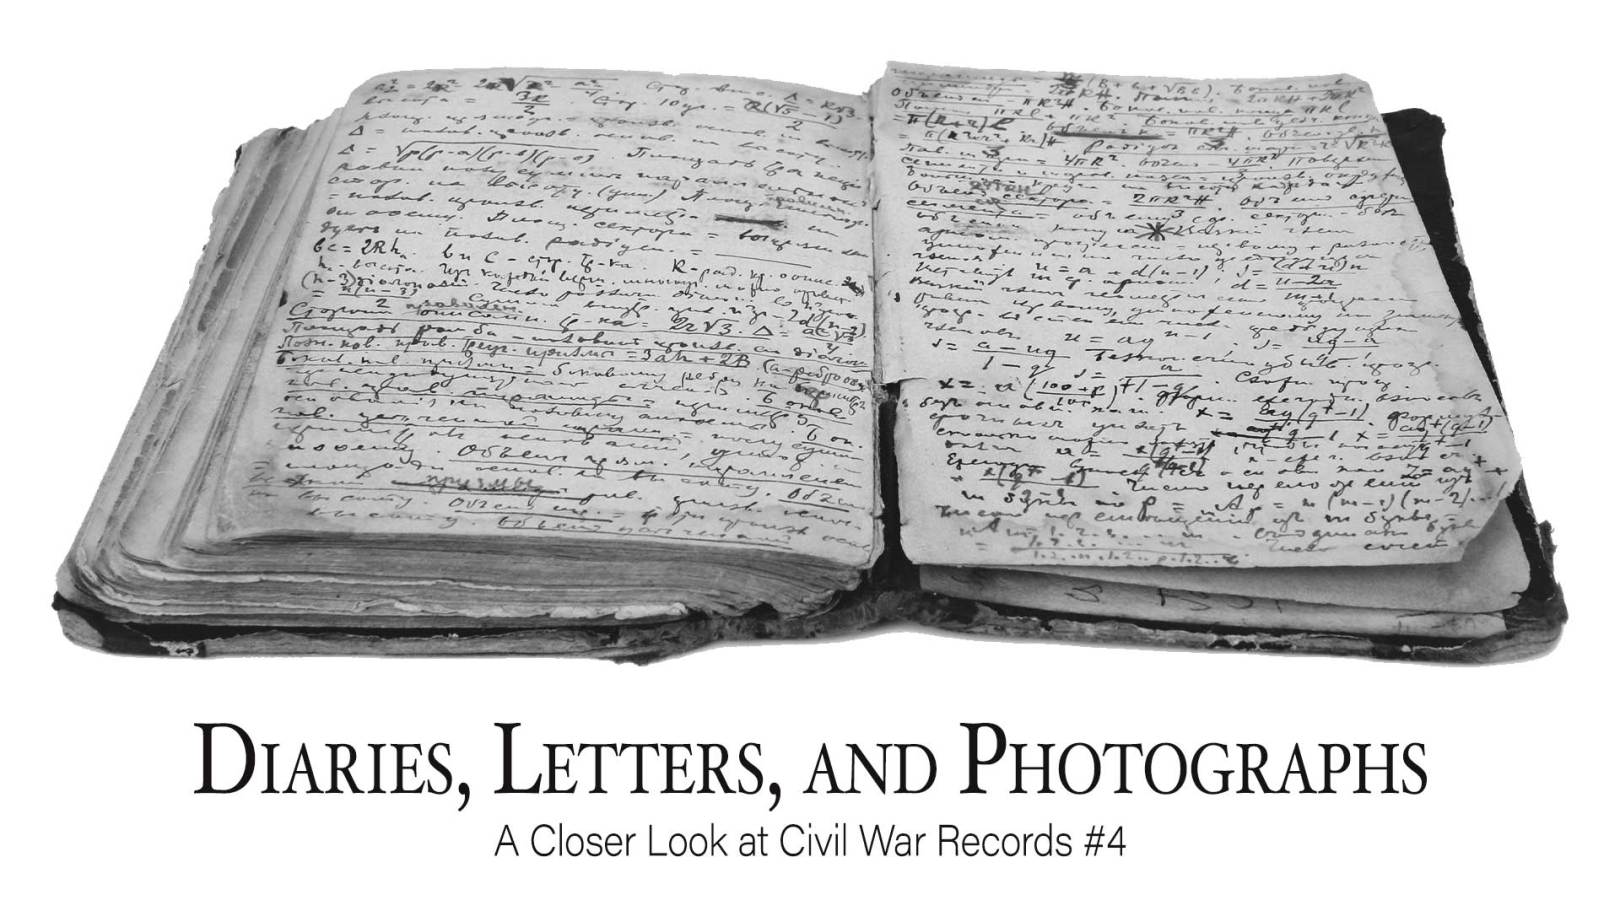 Diaries, Letters, and Photographs: A Closer Look at Civil War Records #4